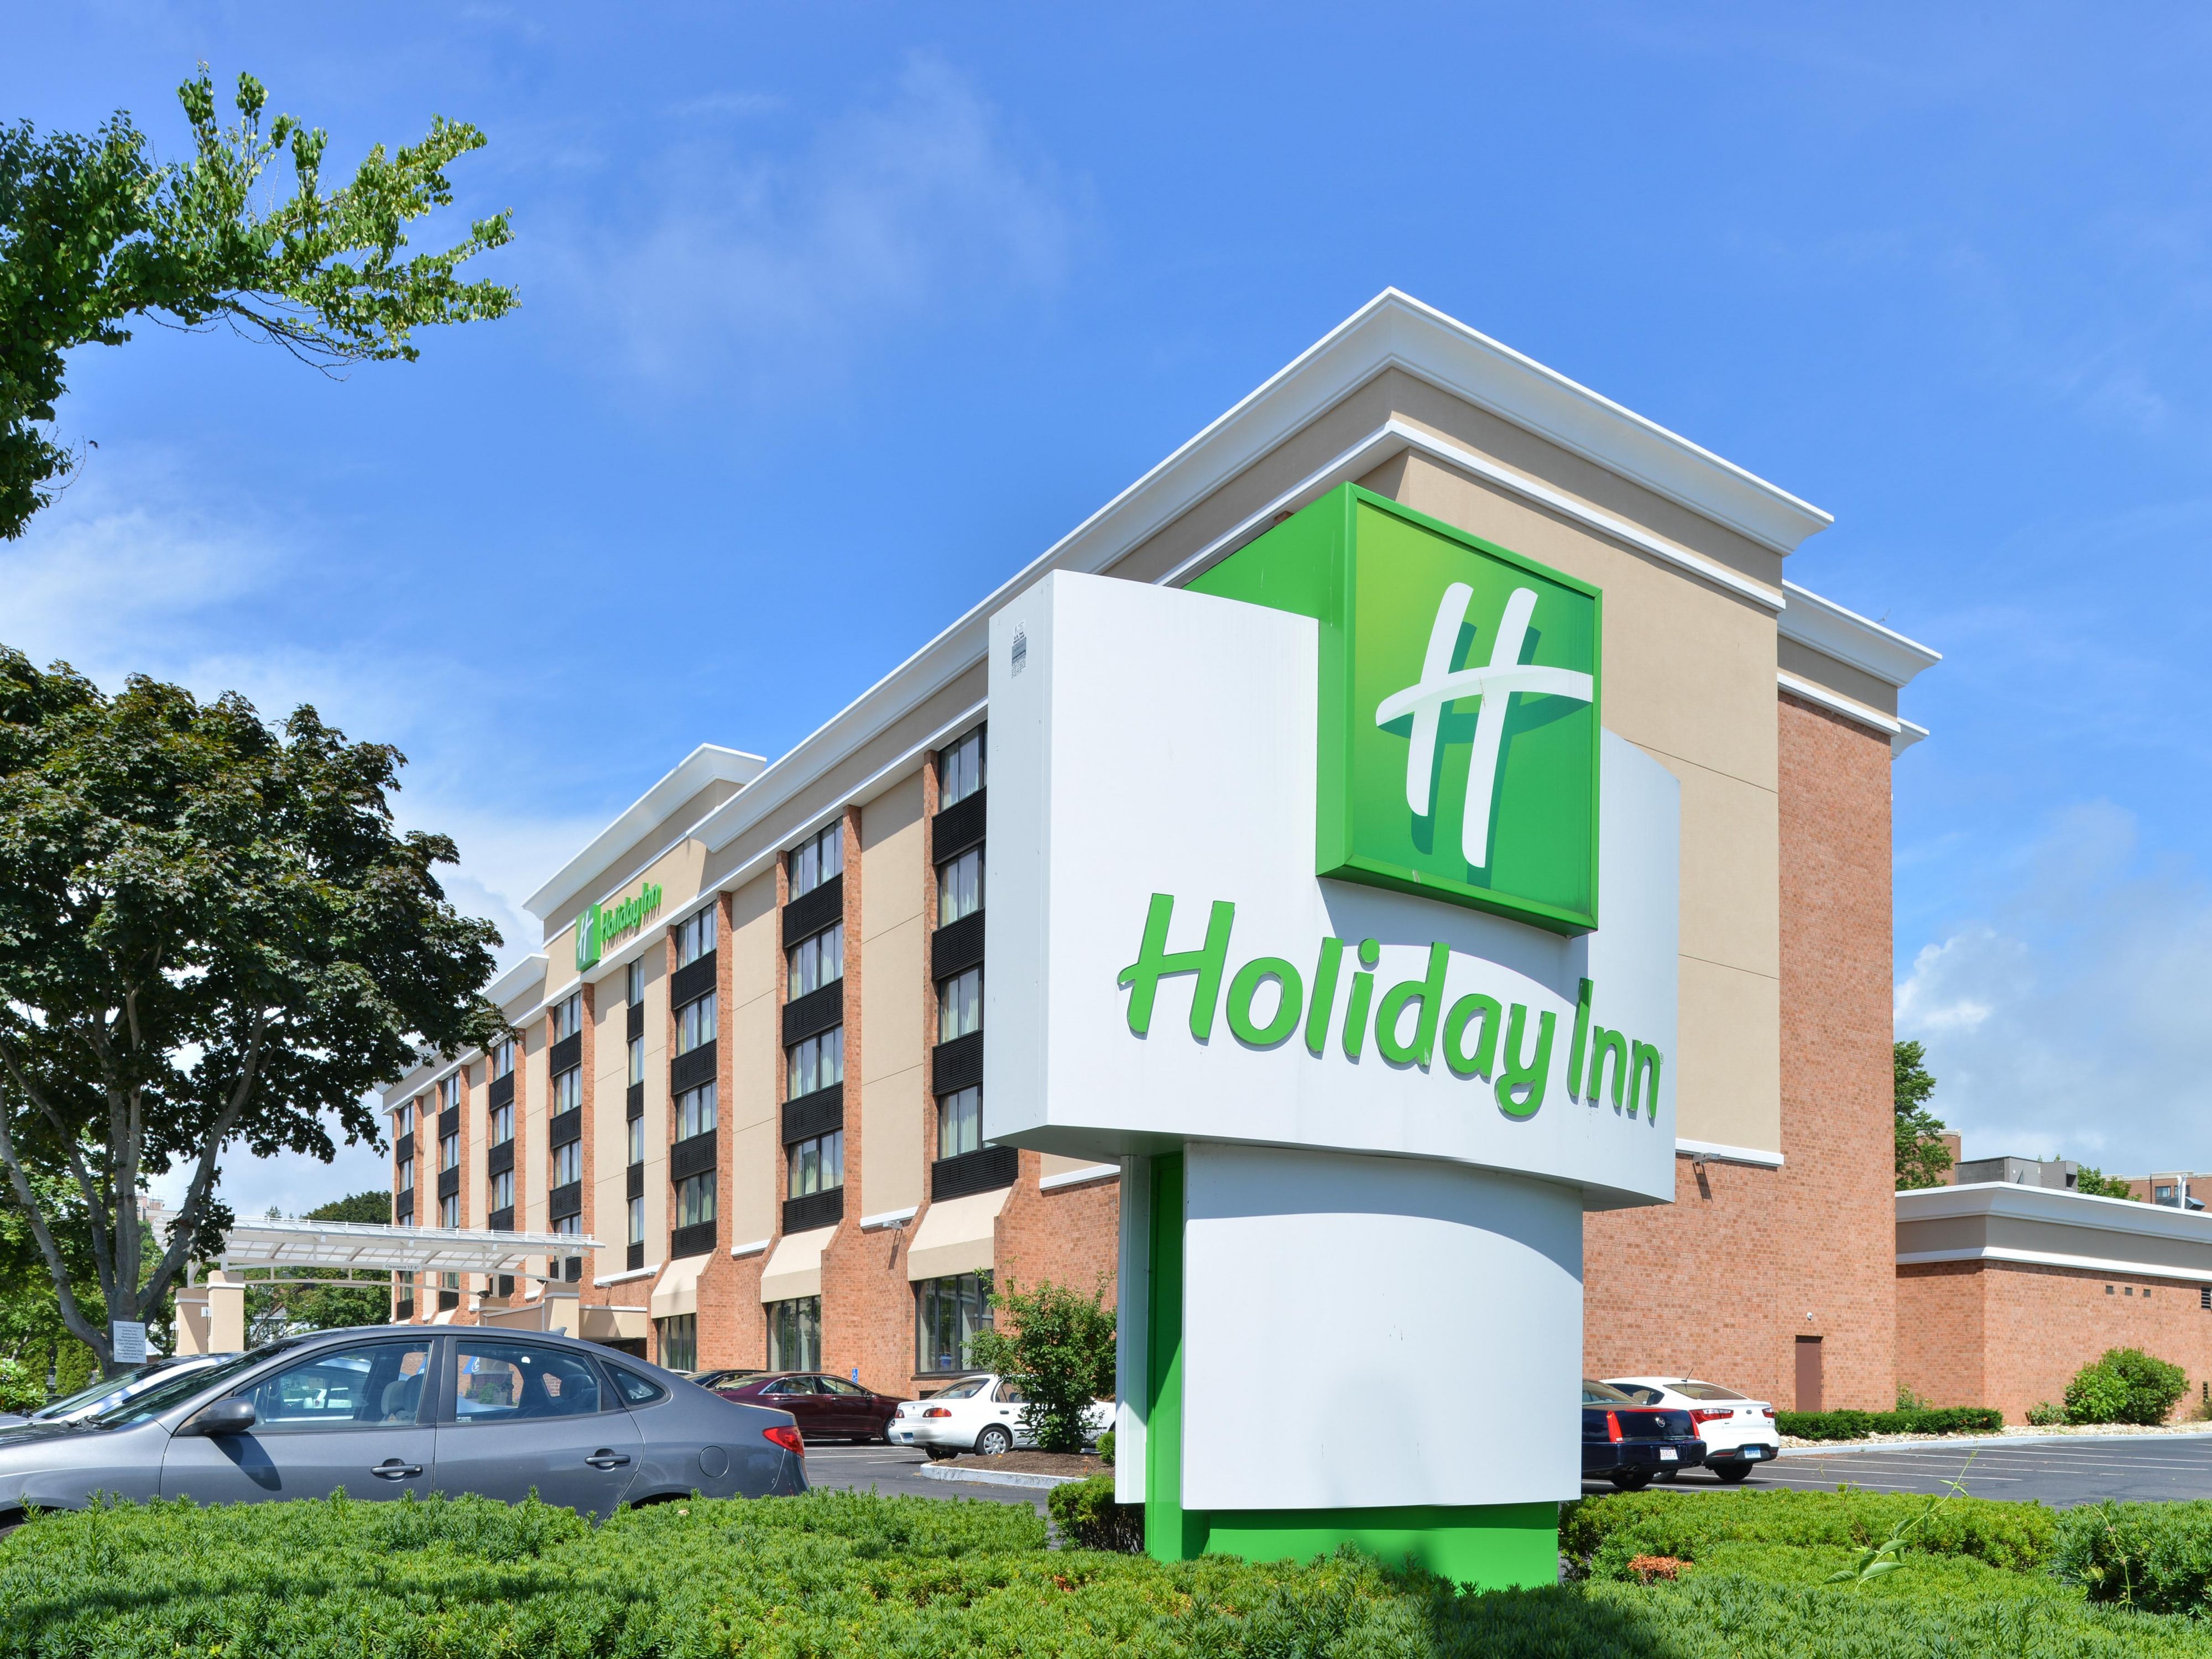 The Holiday Inn New London- Mystic area is located near several popular wedding venues!  Need rooms for your guests?  We've got you covered!  You have enough to worry about as the big day approaches.